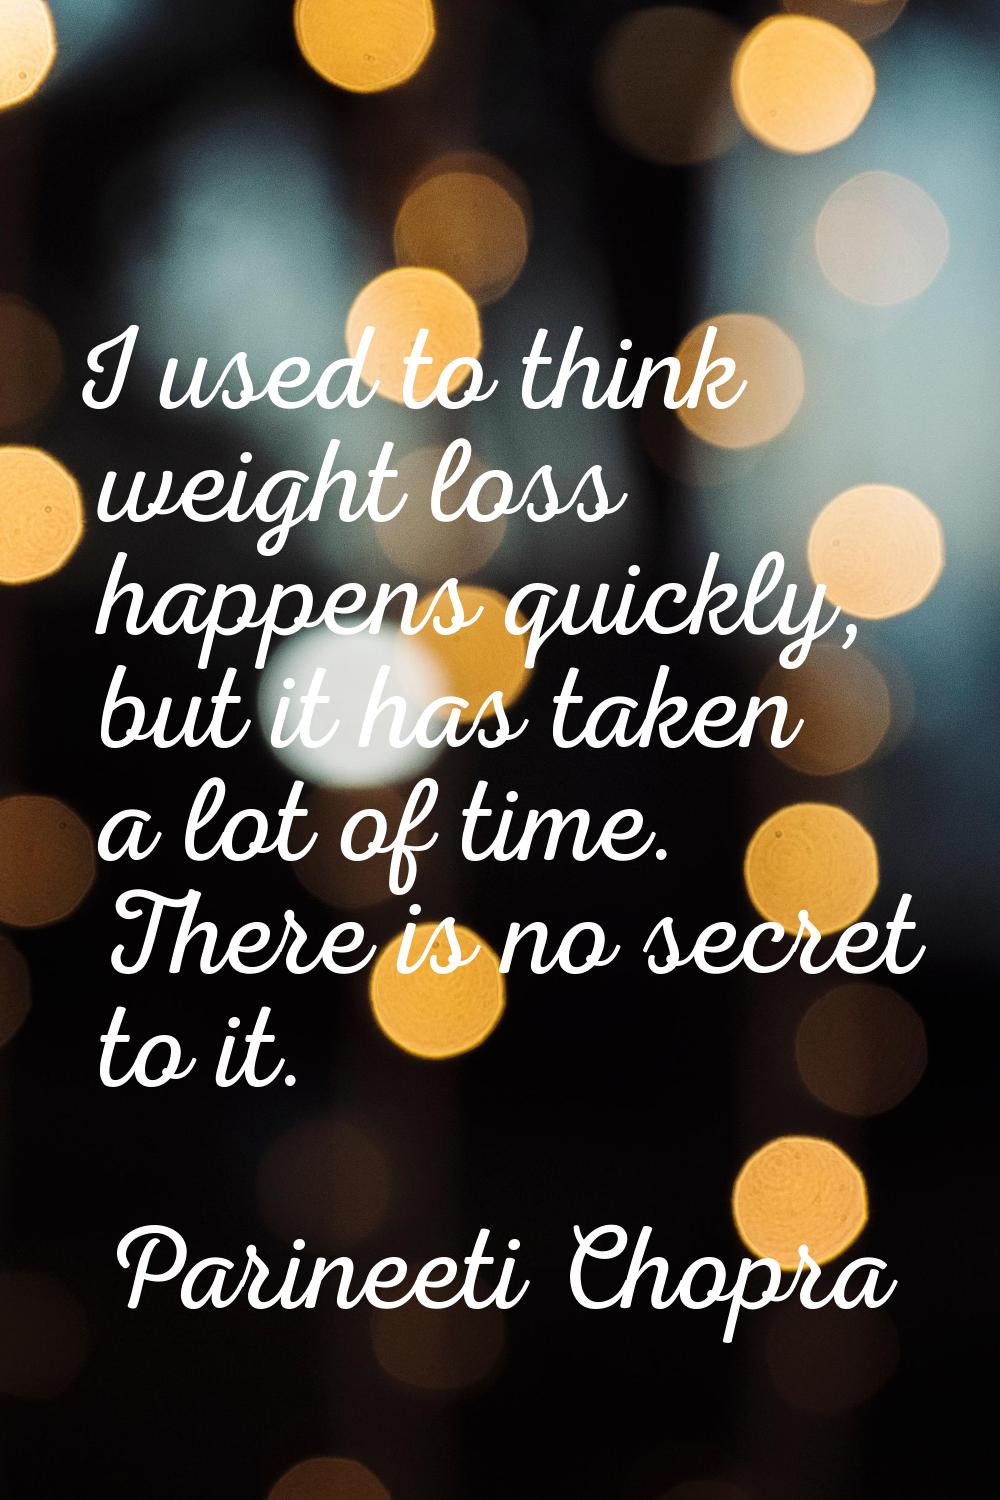 I used to think weight loss happens quickly, but it has taken a lot of time. There is no secret to 